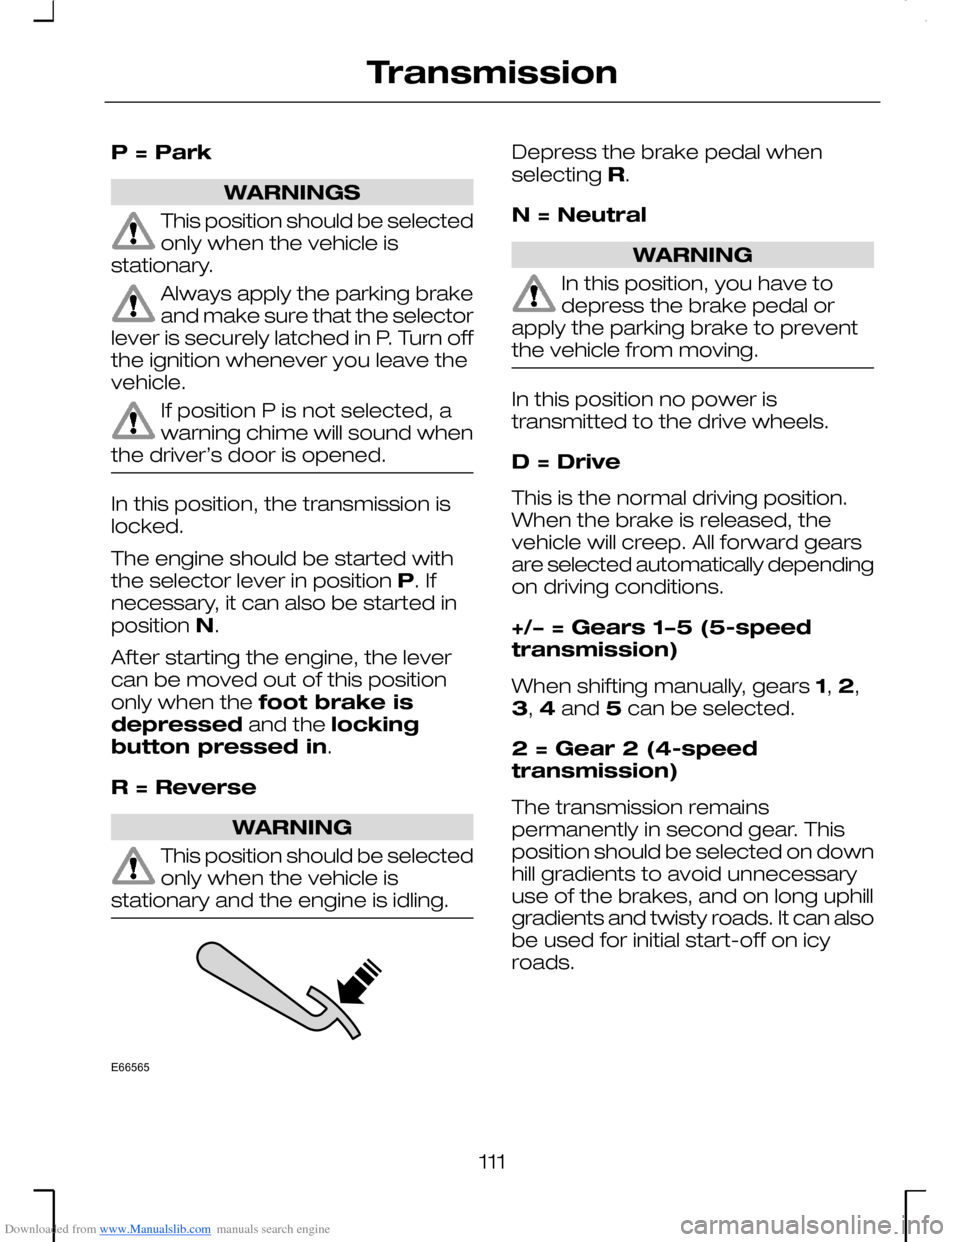 FORD MONDEO 2006 2.G Owners Manual Downloaded from www.Manualslib.com manuals search engine P = Park
WARNINGS
This position should be selectedonly when the vehicle isstationary.
Always apply the parking brakeand make sure that the sele